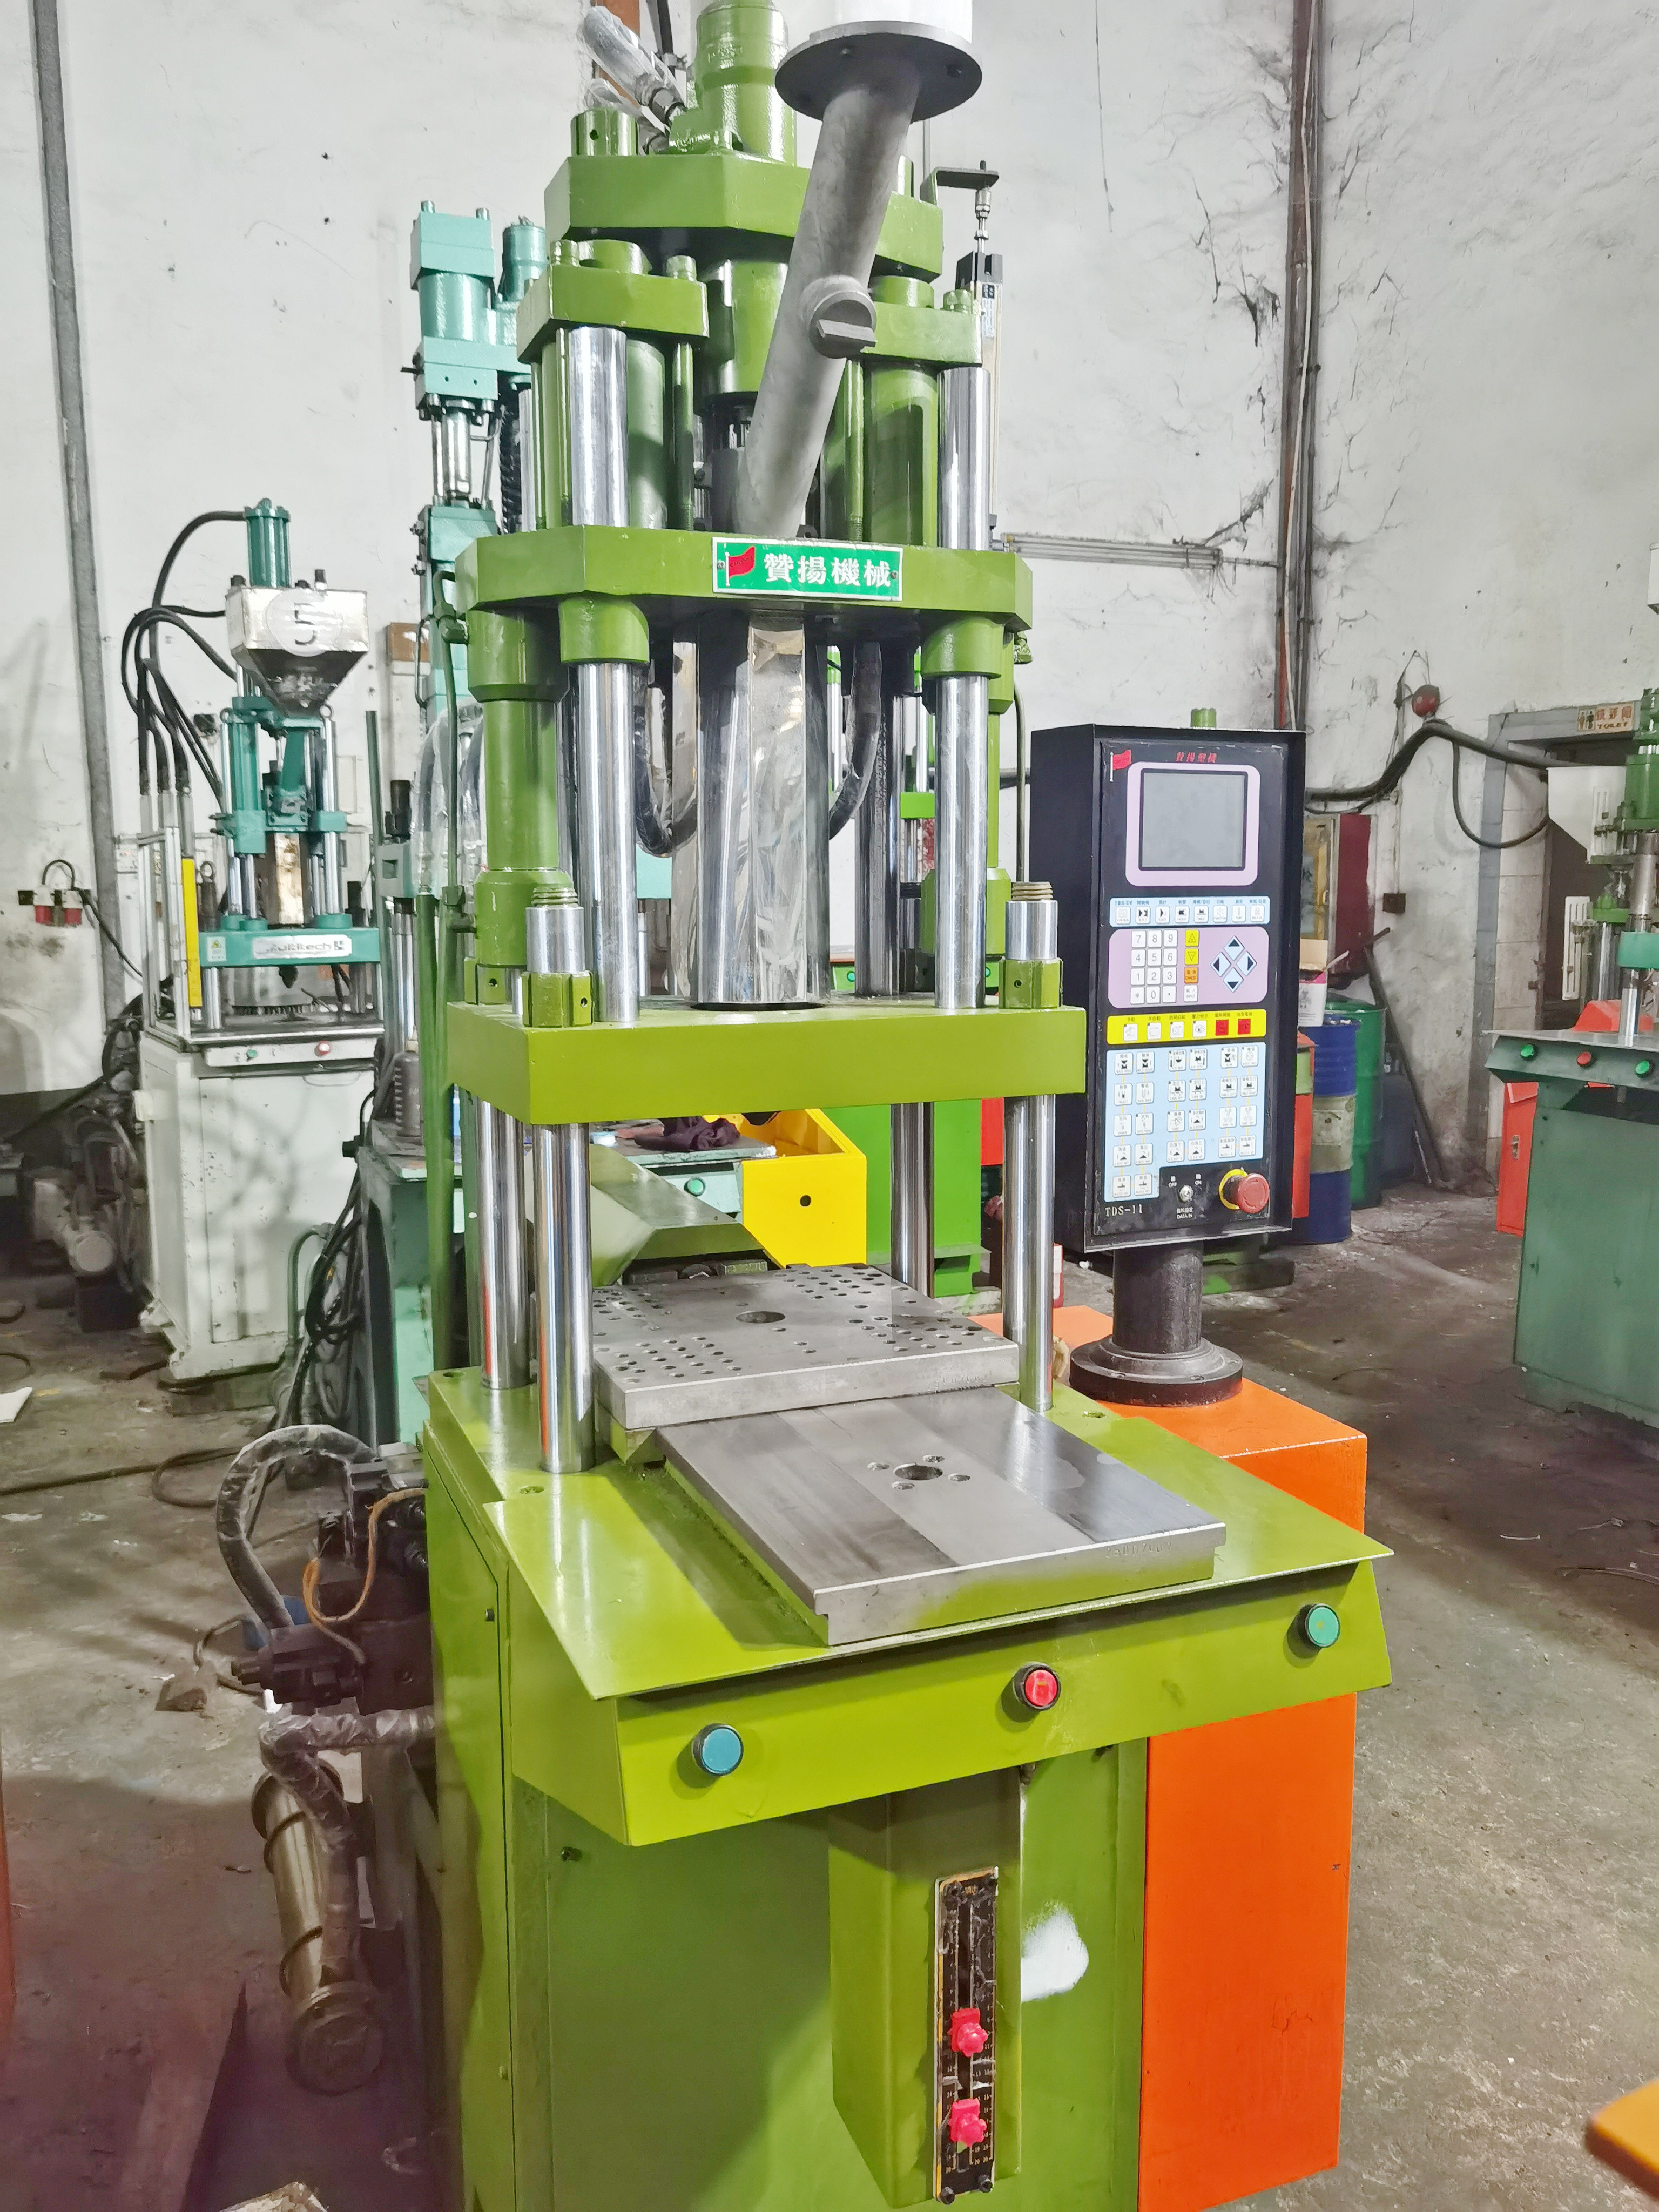 Sell at a low price, praise Baisu skateboard injection molding machine, mother chain, Japanese character chain, key chain, vertical injection molding machine